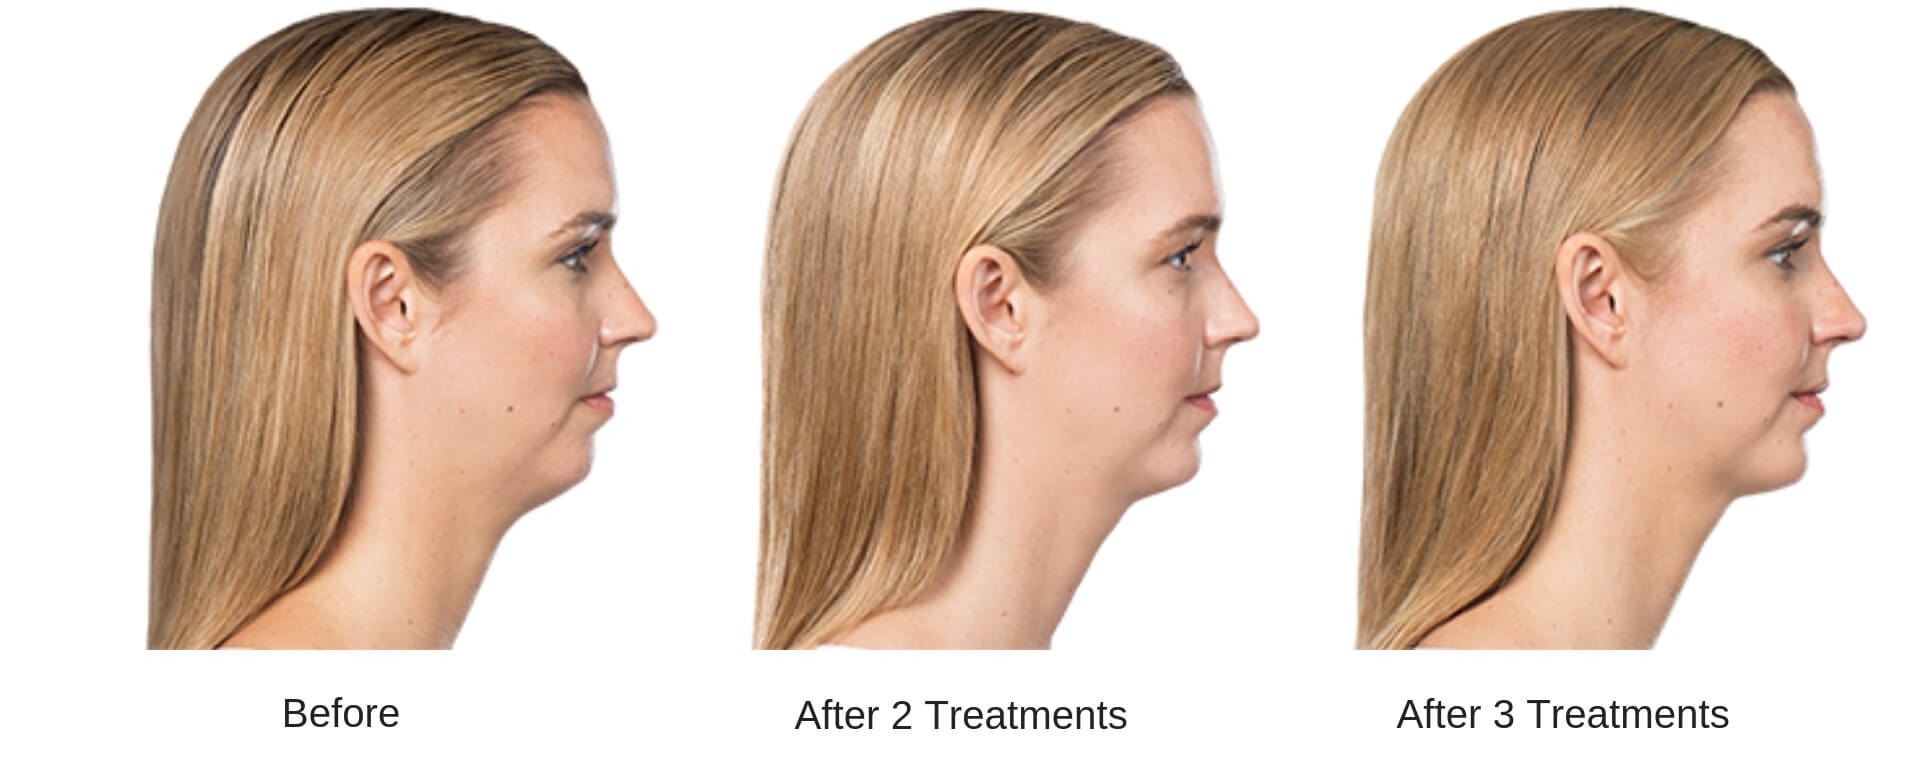 Woman's side profile showing the progression of results of before, after two treatments, and after three treatments of a Kybella series.